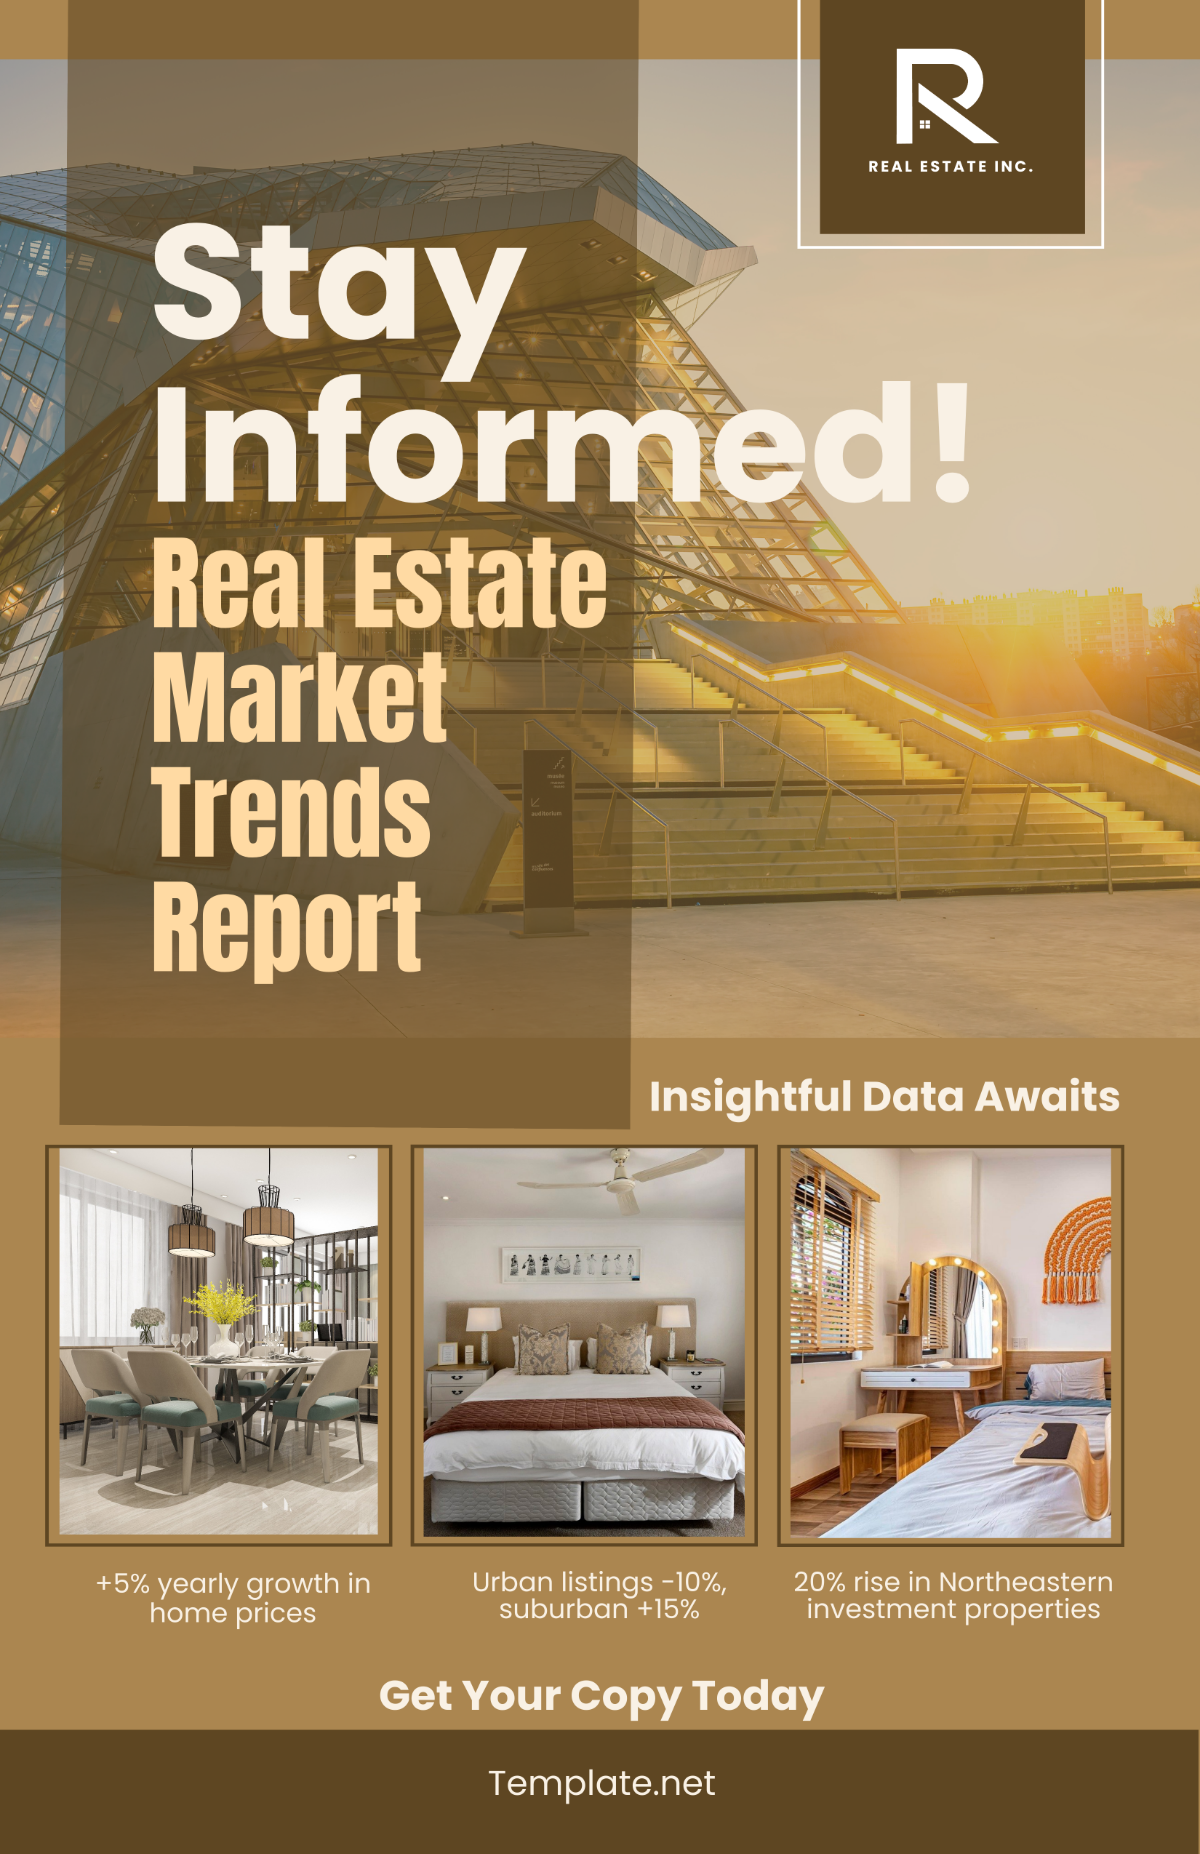 Free Real Estate Market Trends Report Poster Template